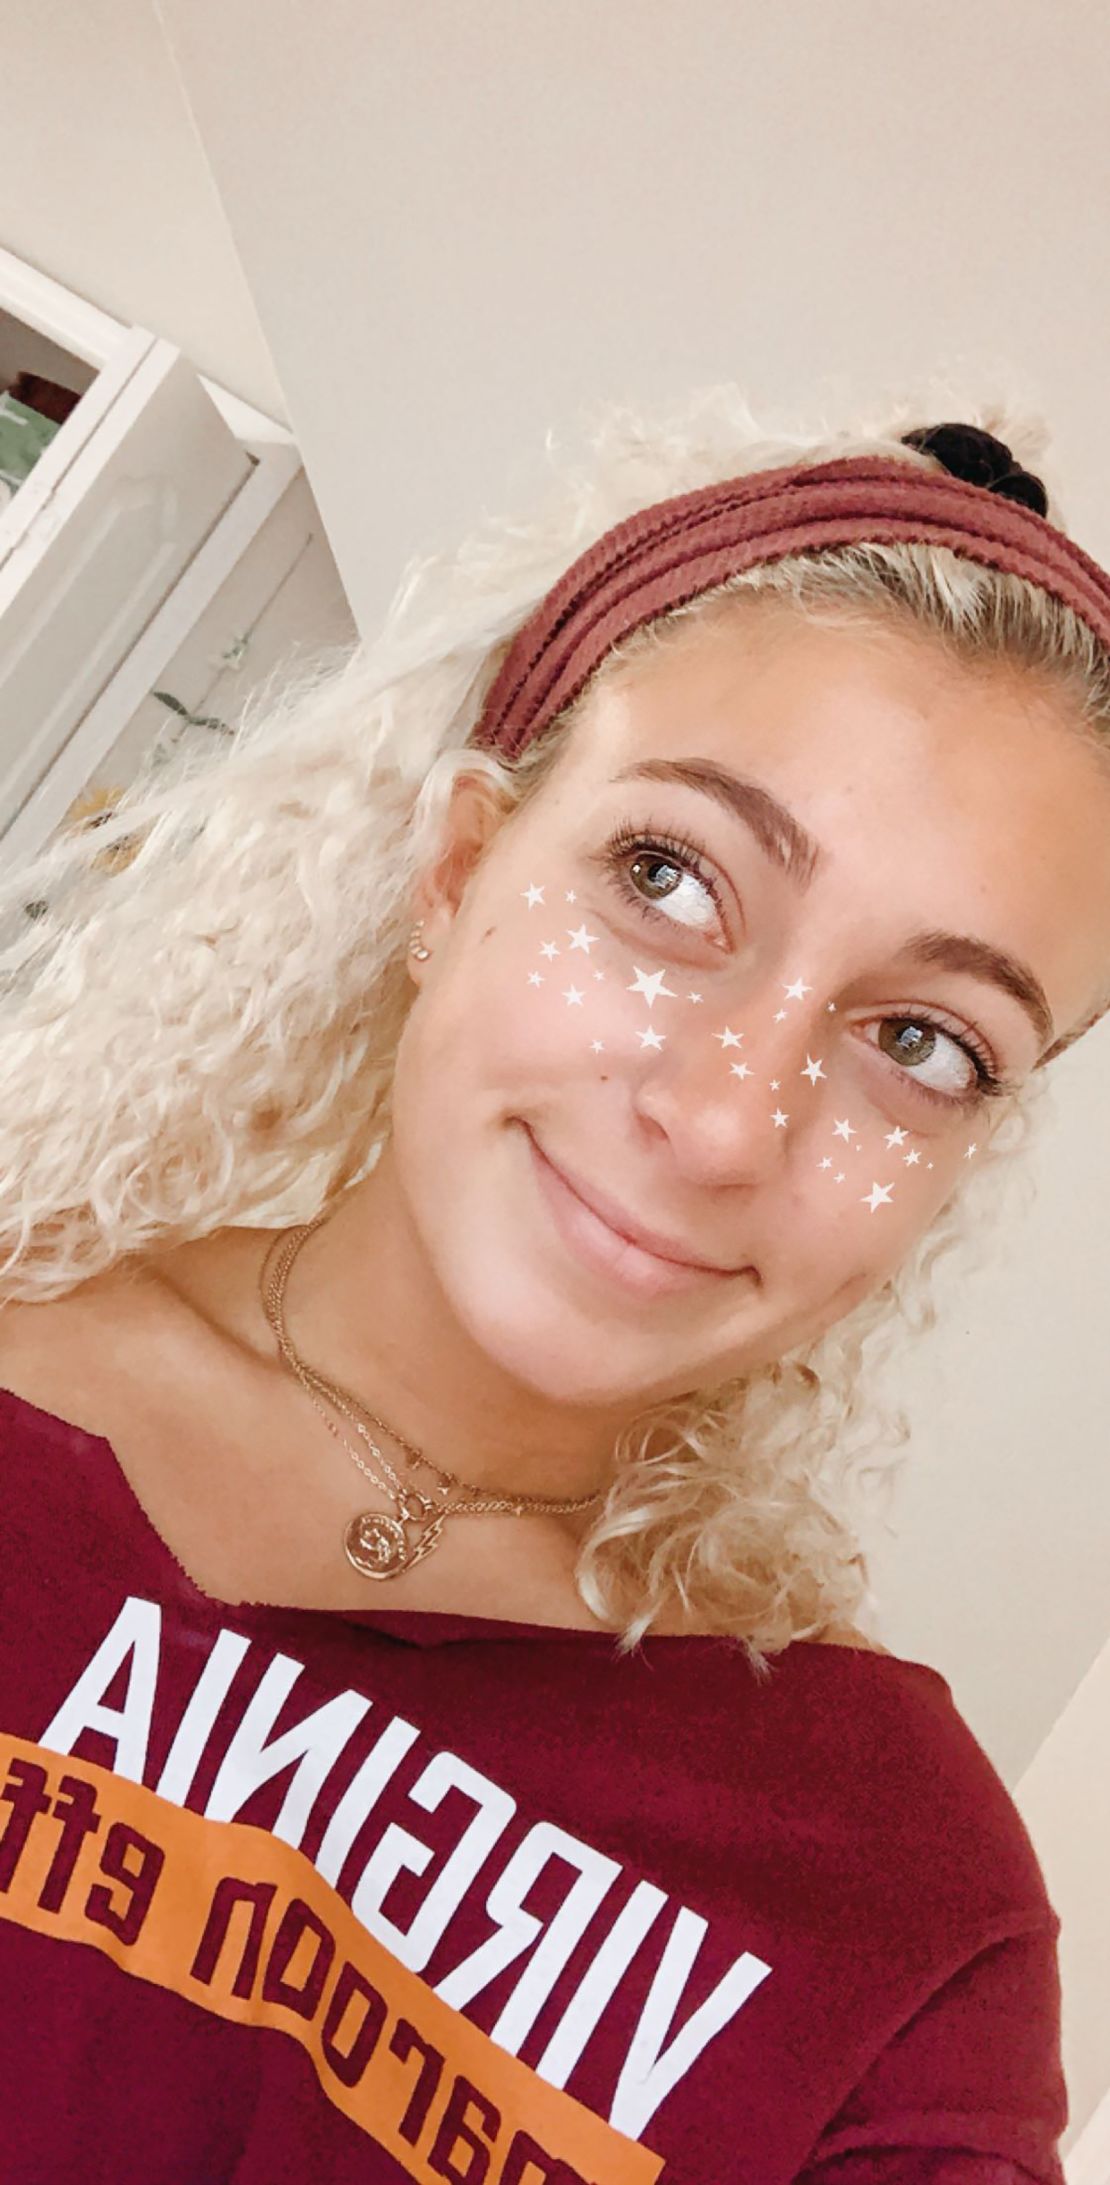 Casciello using her filter that gives users freckles in the shape of stars.